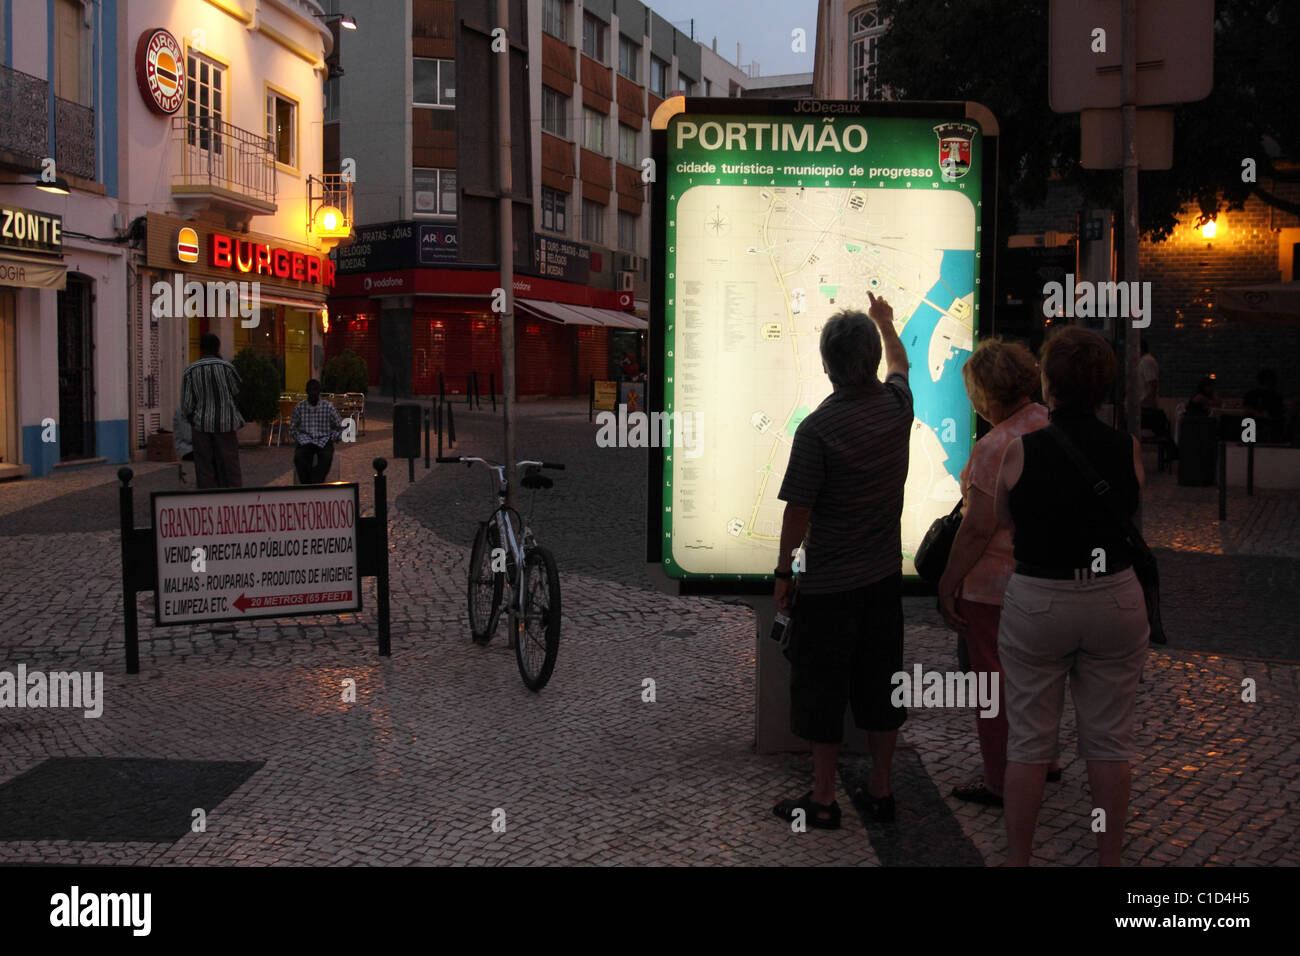 Tourists look at a map of the city of Portimao in the late evening. Portimao, Algarve, PORTUGAL Stock Photo